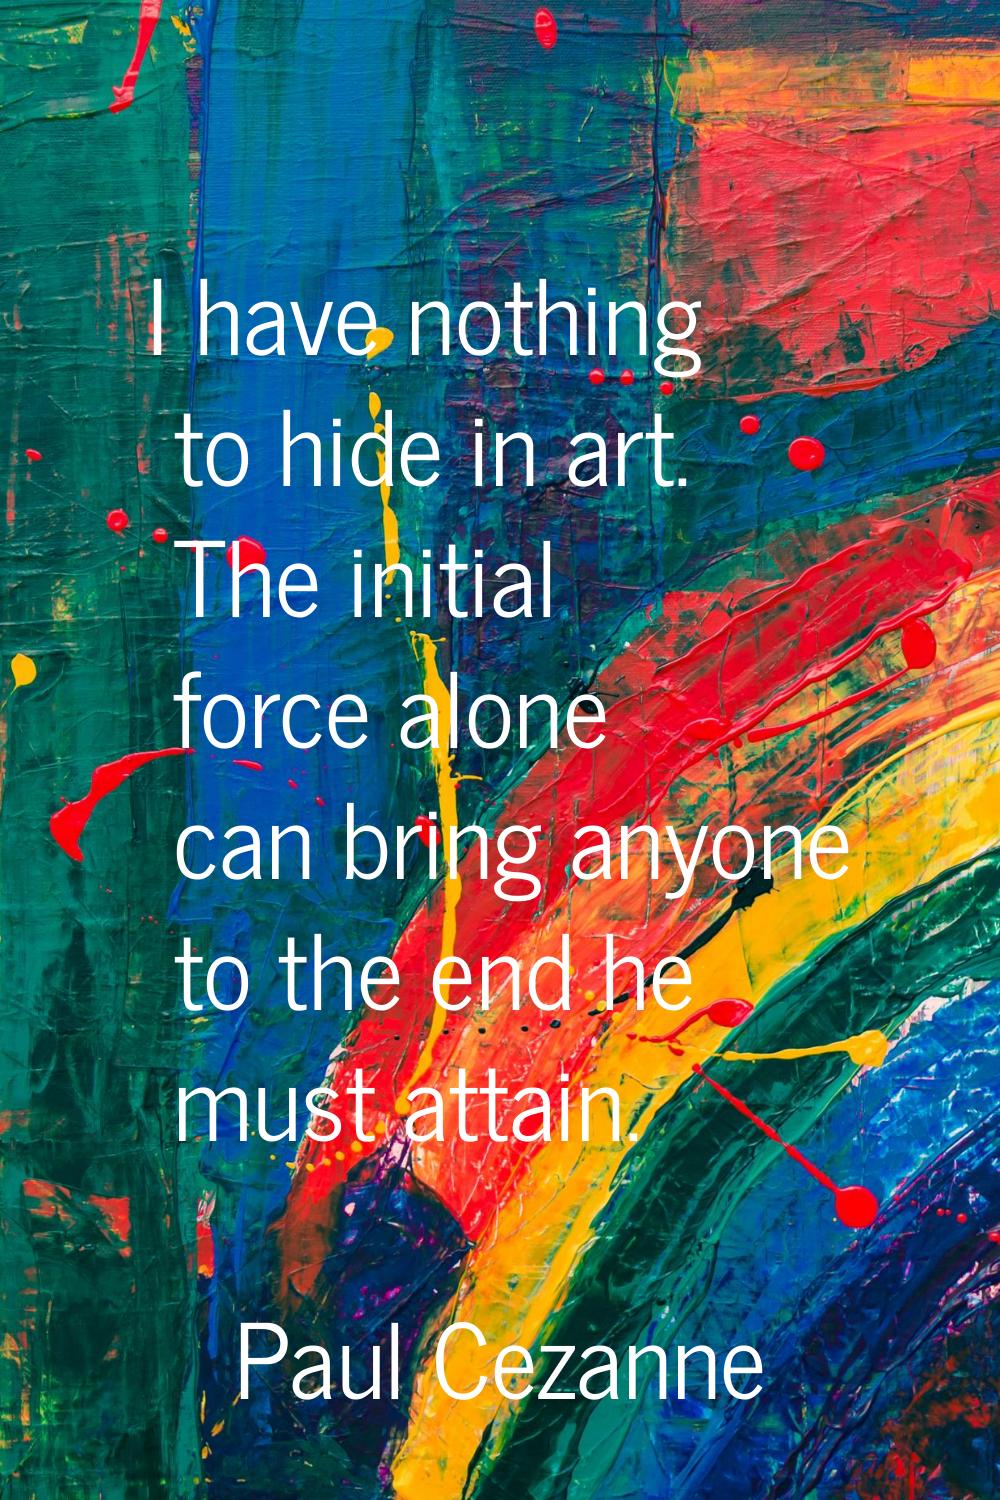 I have nothing to hide in art. The initial force alone can bring anyone to the end he must attain.